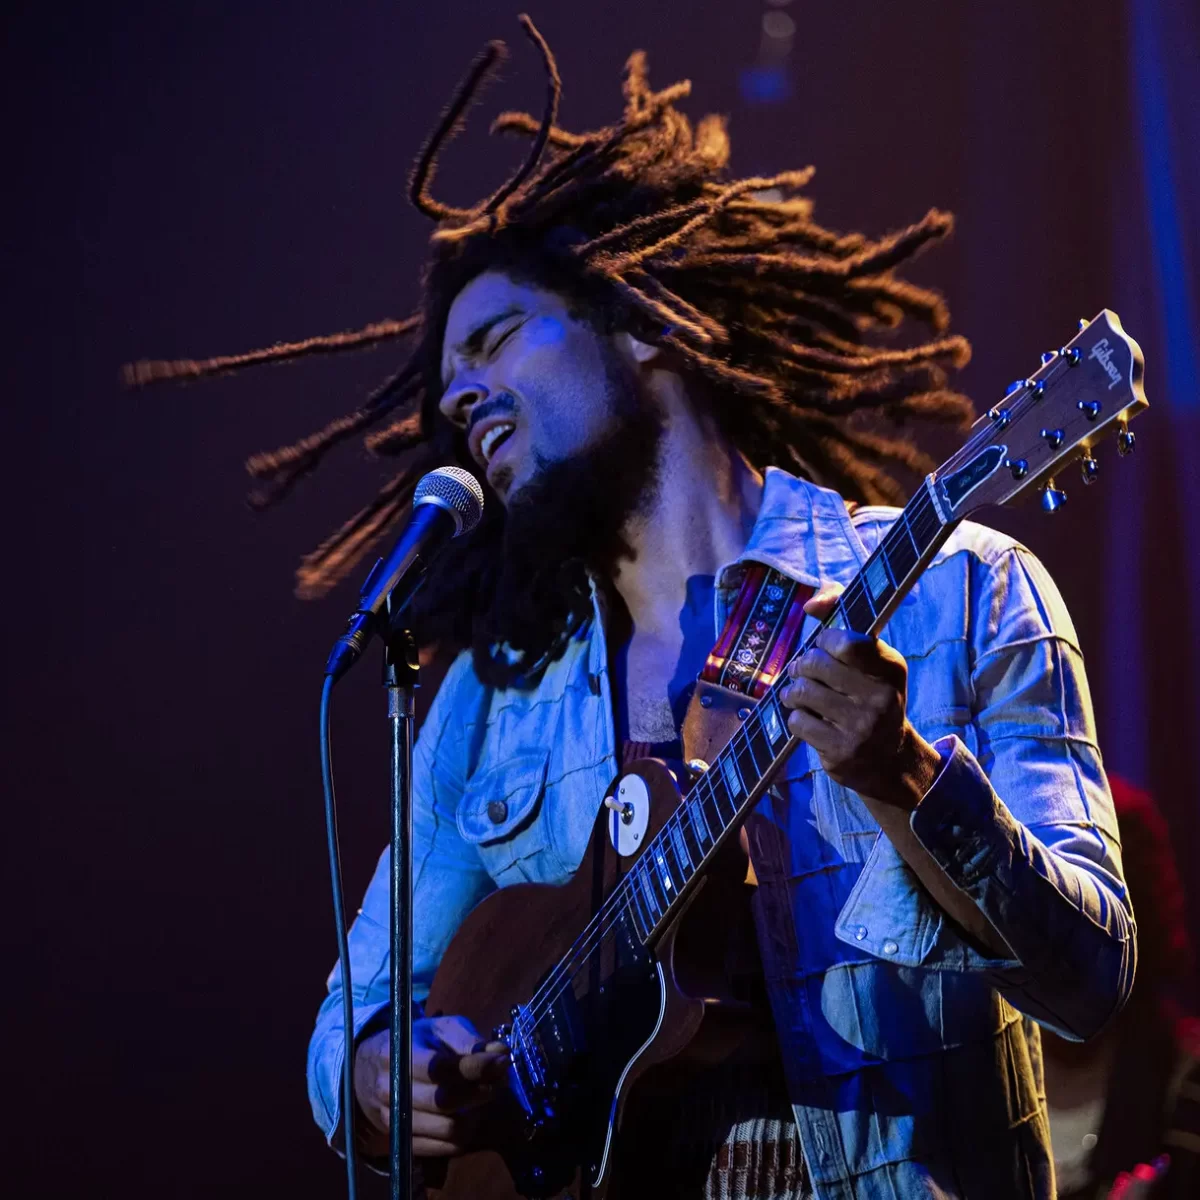 Bob Marley (Kingsley Ben-Adir) singing a song filled with message on stage after his popular album release Exodus. The film Bob Marley: One Love is currently ranked #1 in America since its release on Feb. 14 as it reveals the true message behind his legendary music.